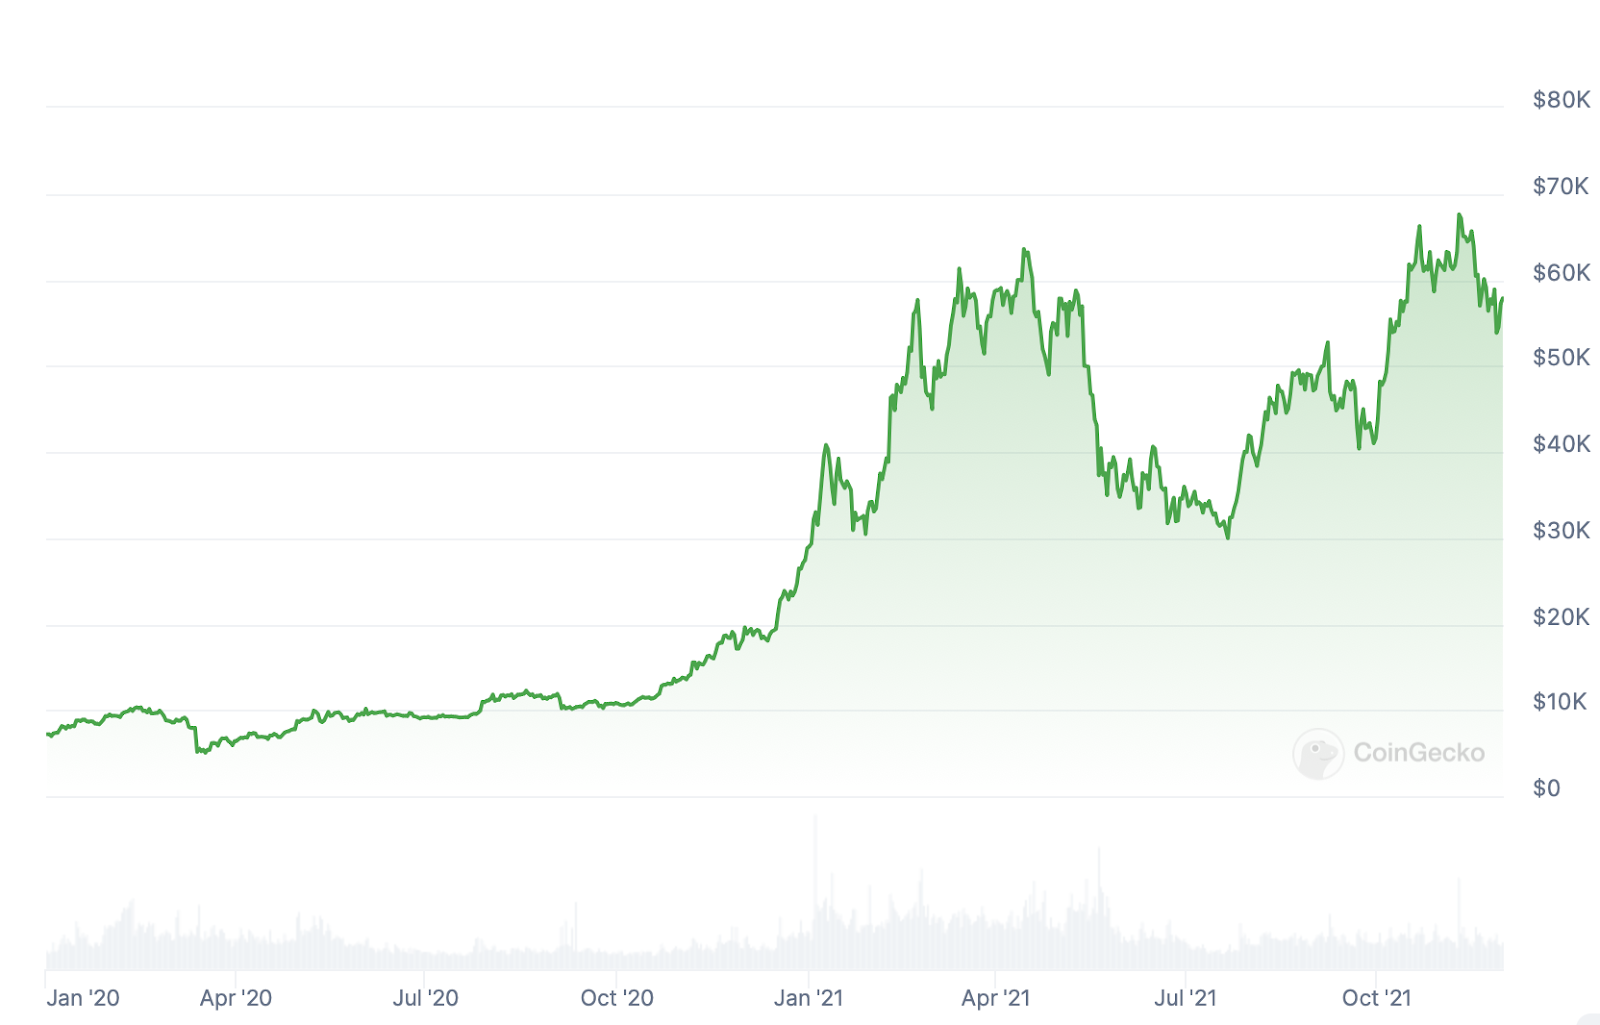 What can the past Bitcoin halving cycles tell us about its future? - 3